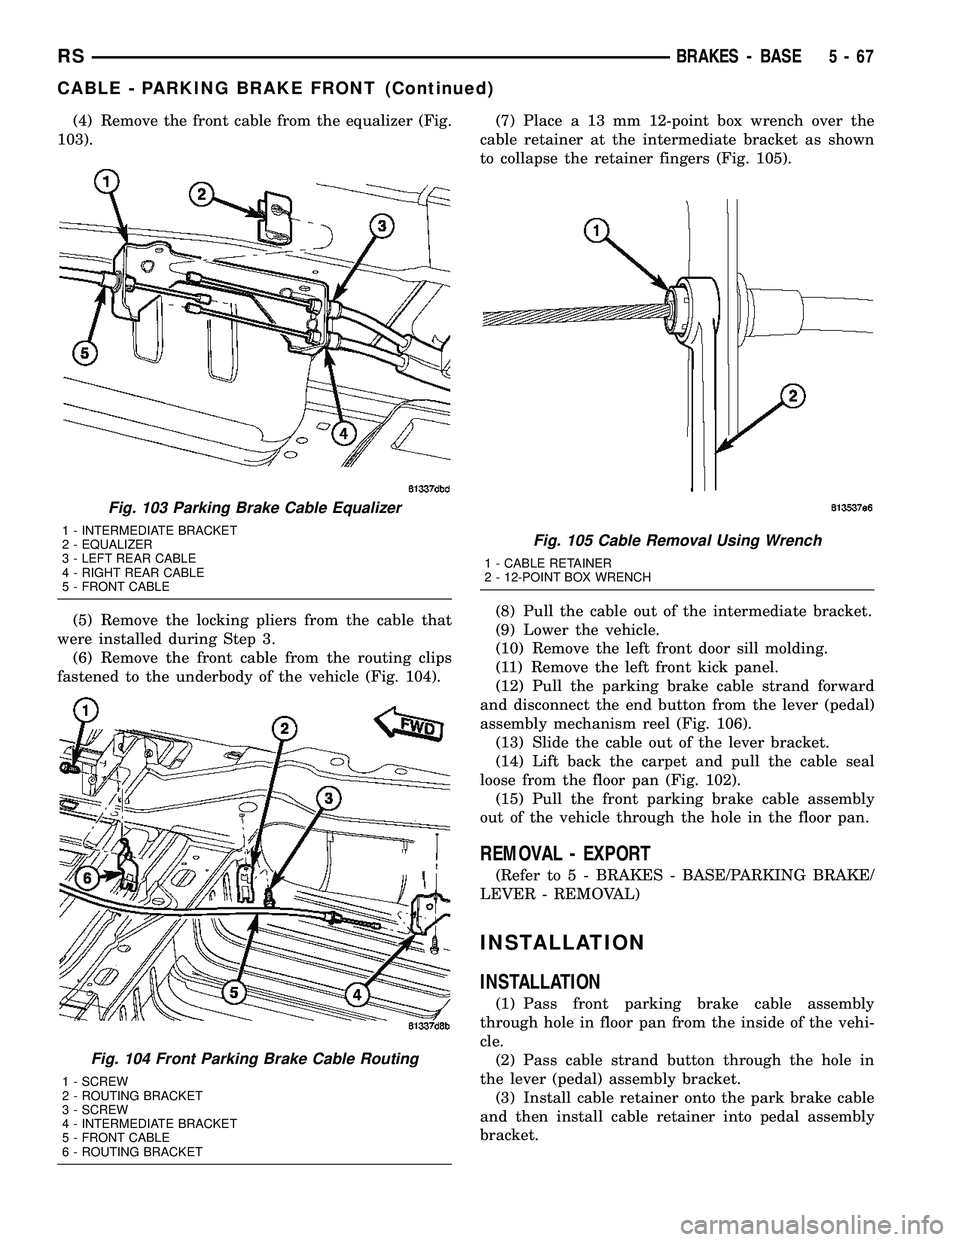 CHRYSLER VOYAGER 2005  Service Manual (4) Remove the front cable from the equalizer (Fig.
103).
(5) Remove the locking pliers from the cable that
were installed during Step 3.
(6) Remove the front cable from the routing clips
fastened to 